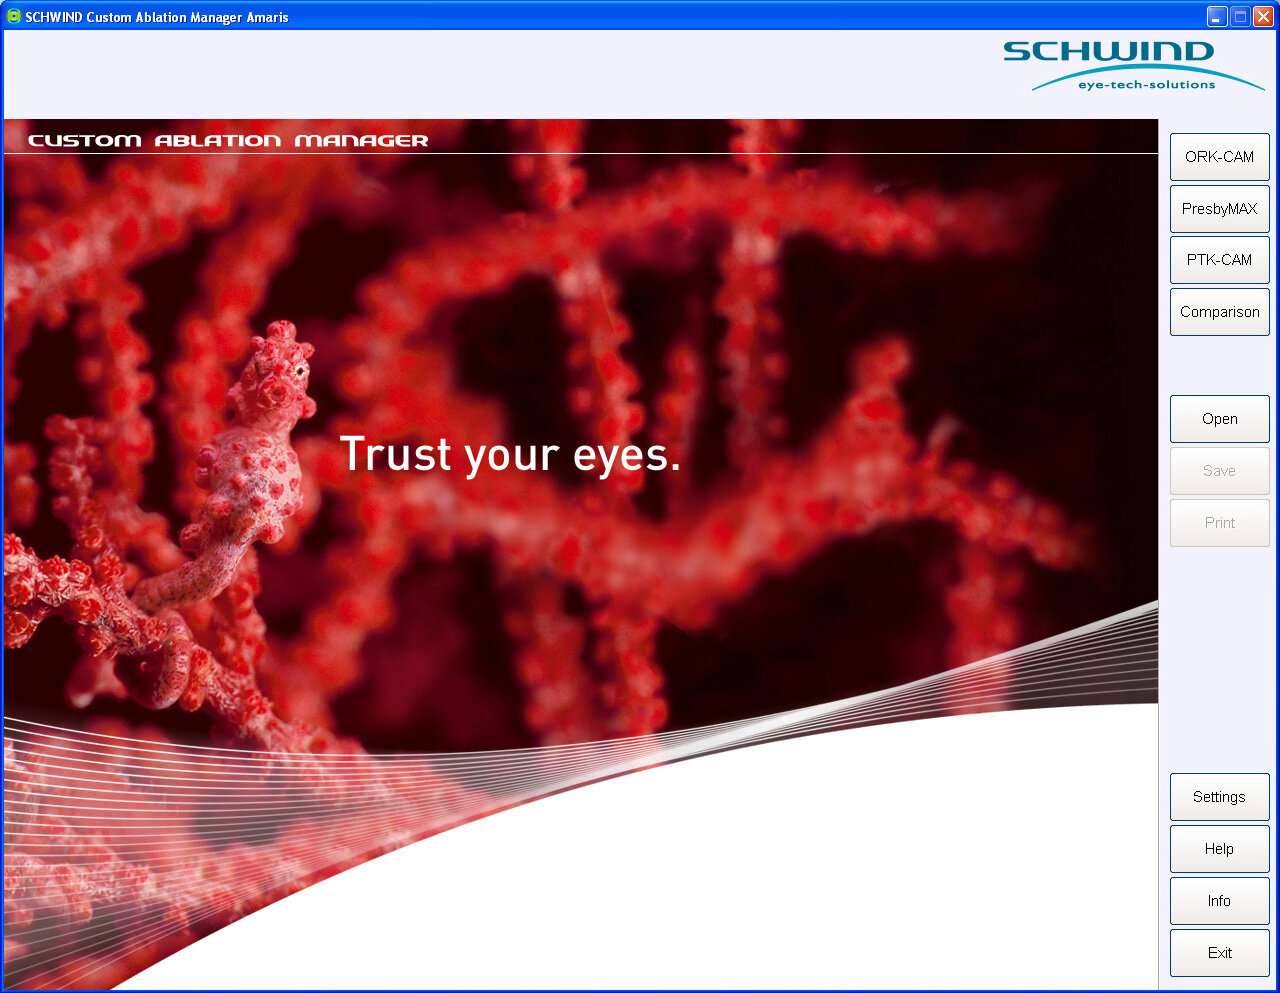 Screen interface with image-motive "red seahorse"